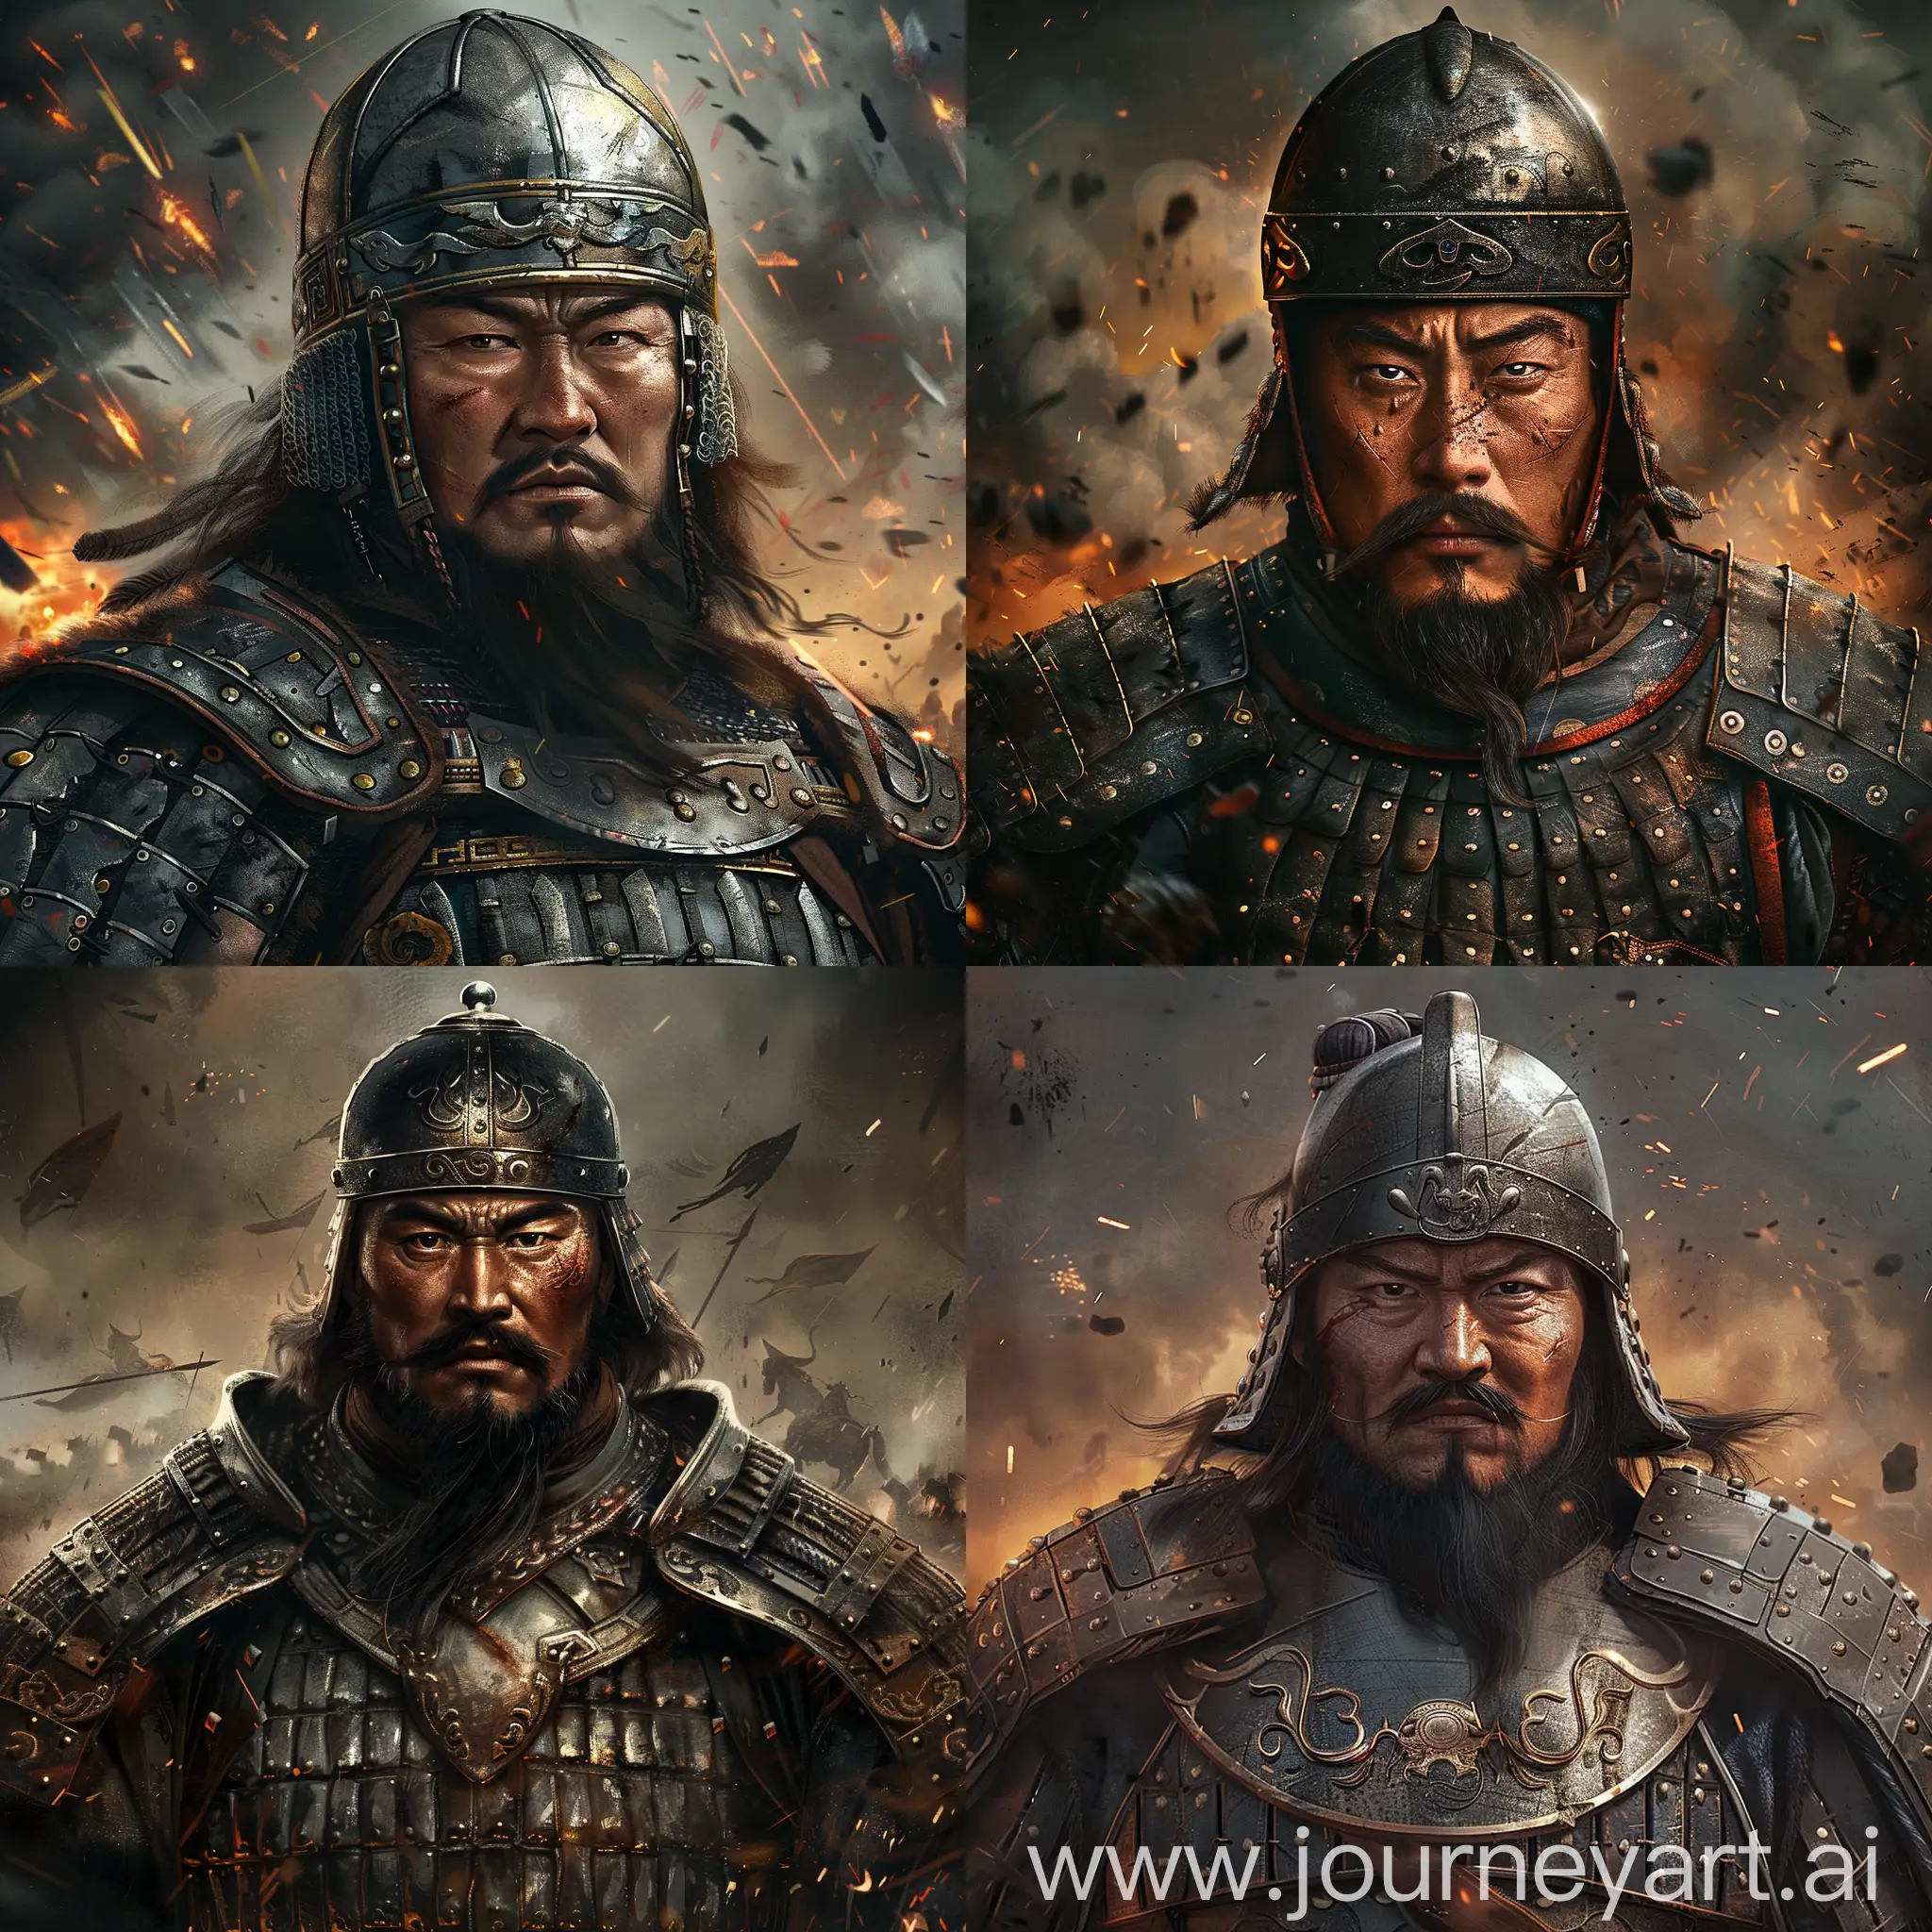 Portrait of Genghis Khan, depicted in Mongolian lamellar armor and Mongolian helmet, beard and mustache, historical accuracy, war and chaos background, his face expression is cruel, cinematic lighting